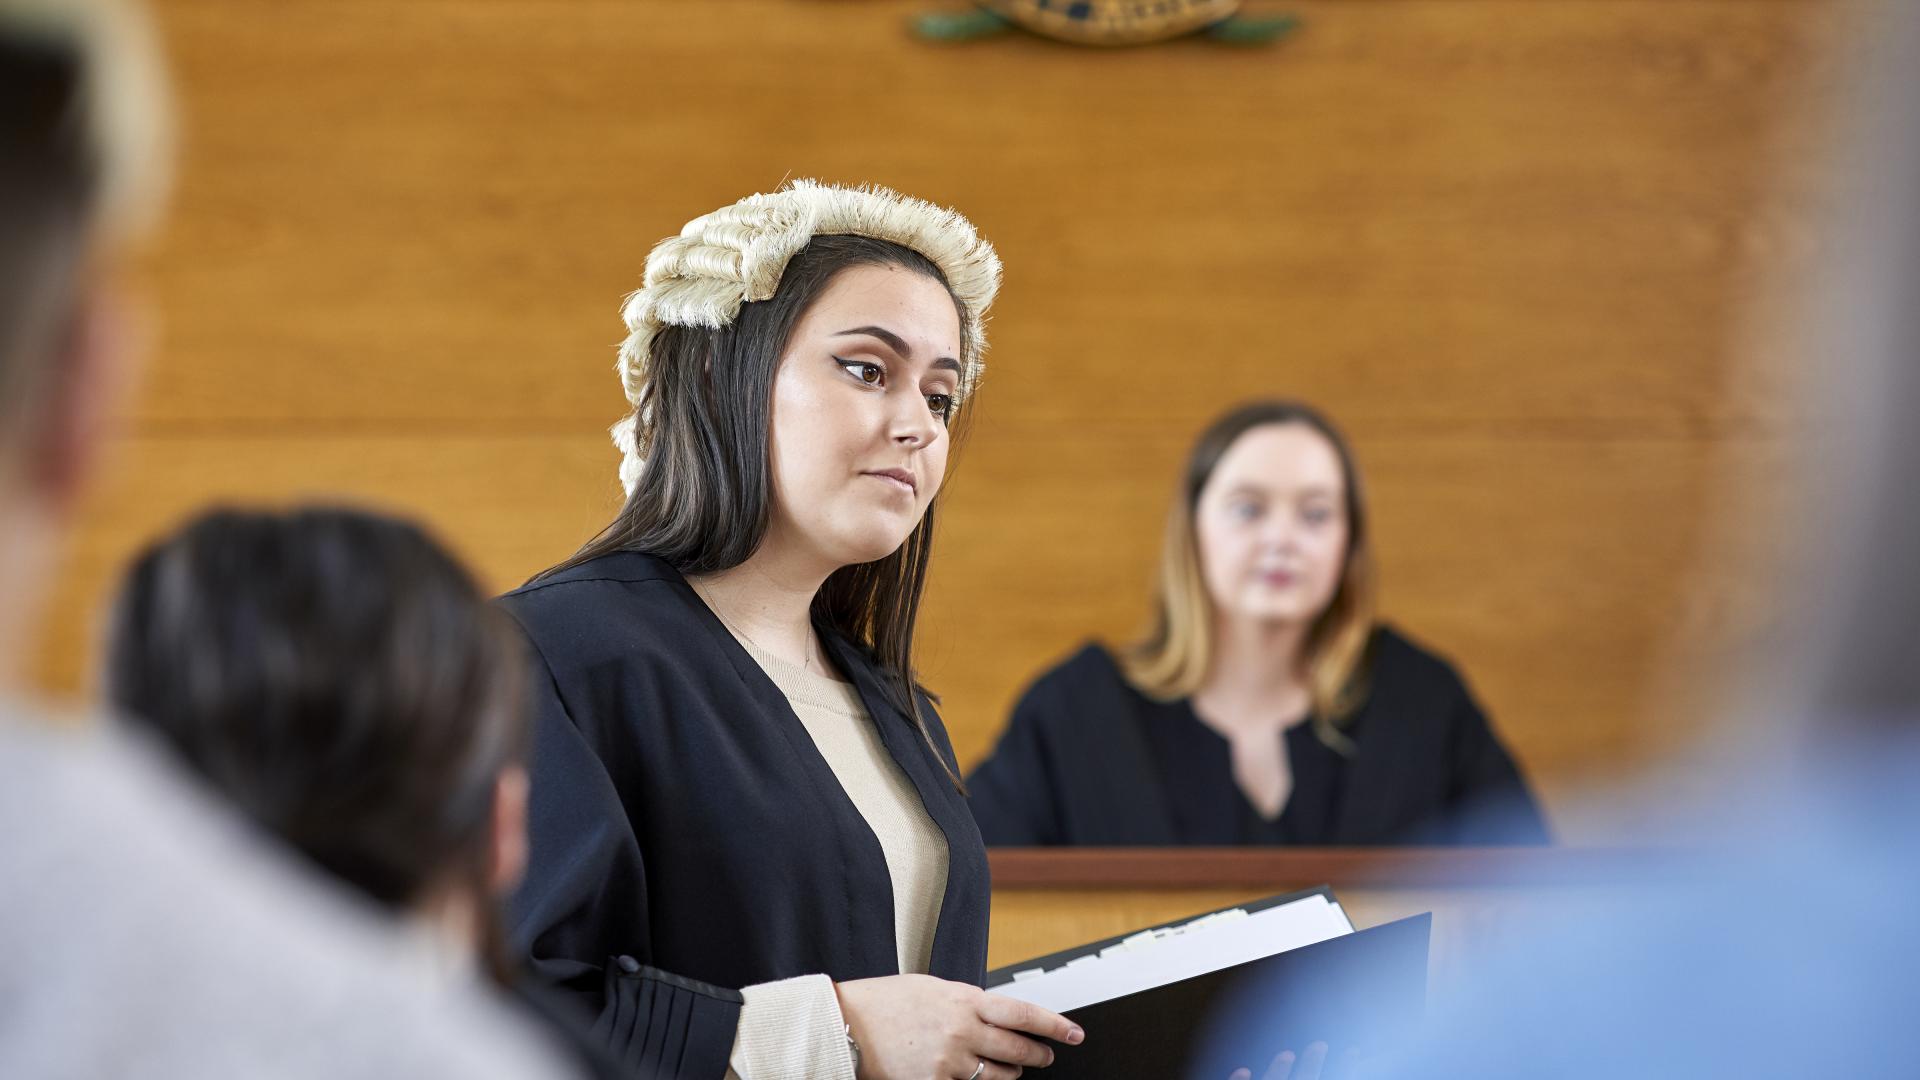 Students mooting in mock courtroom